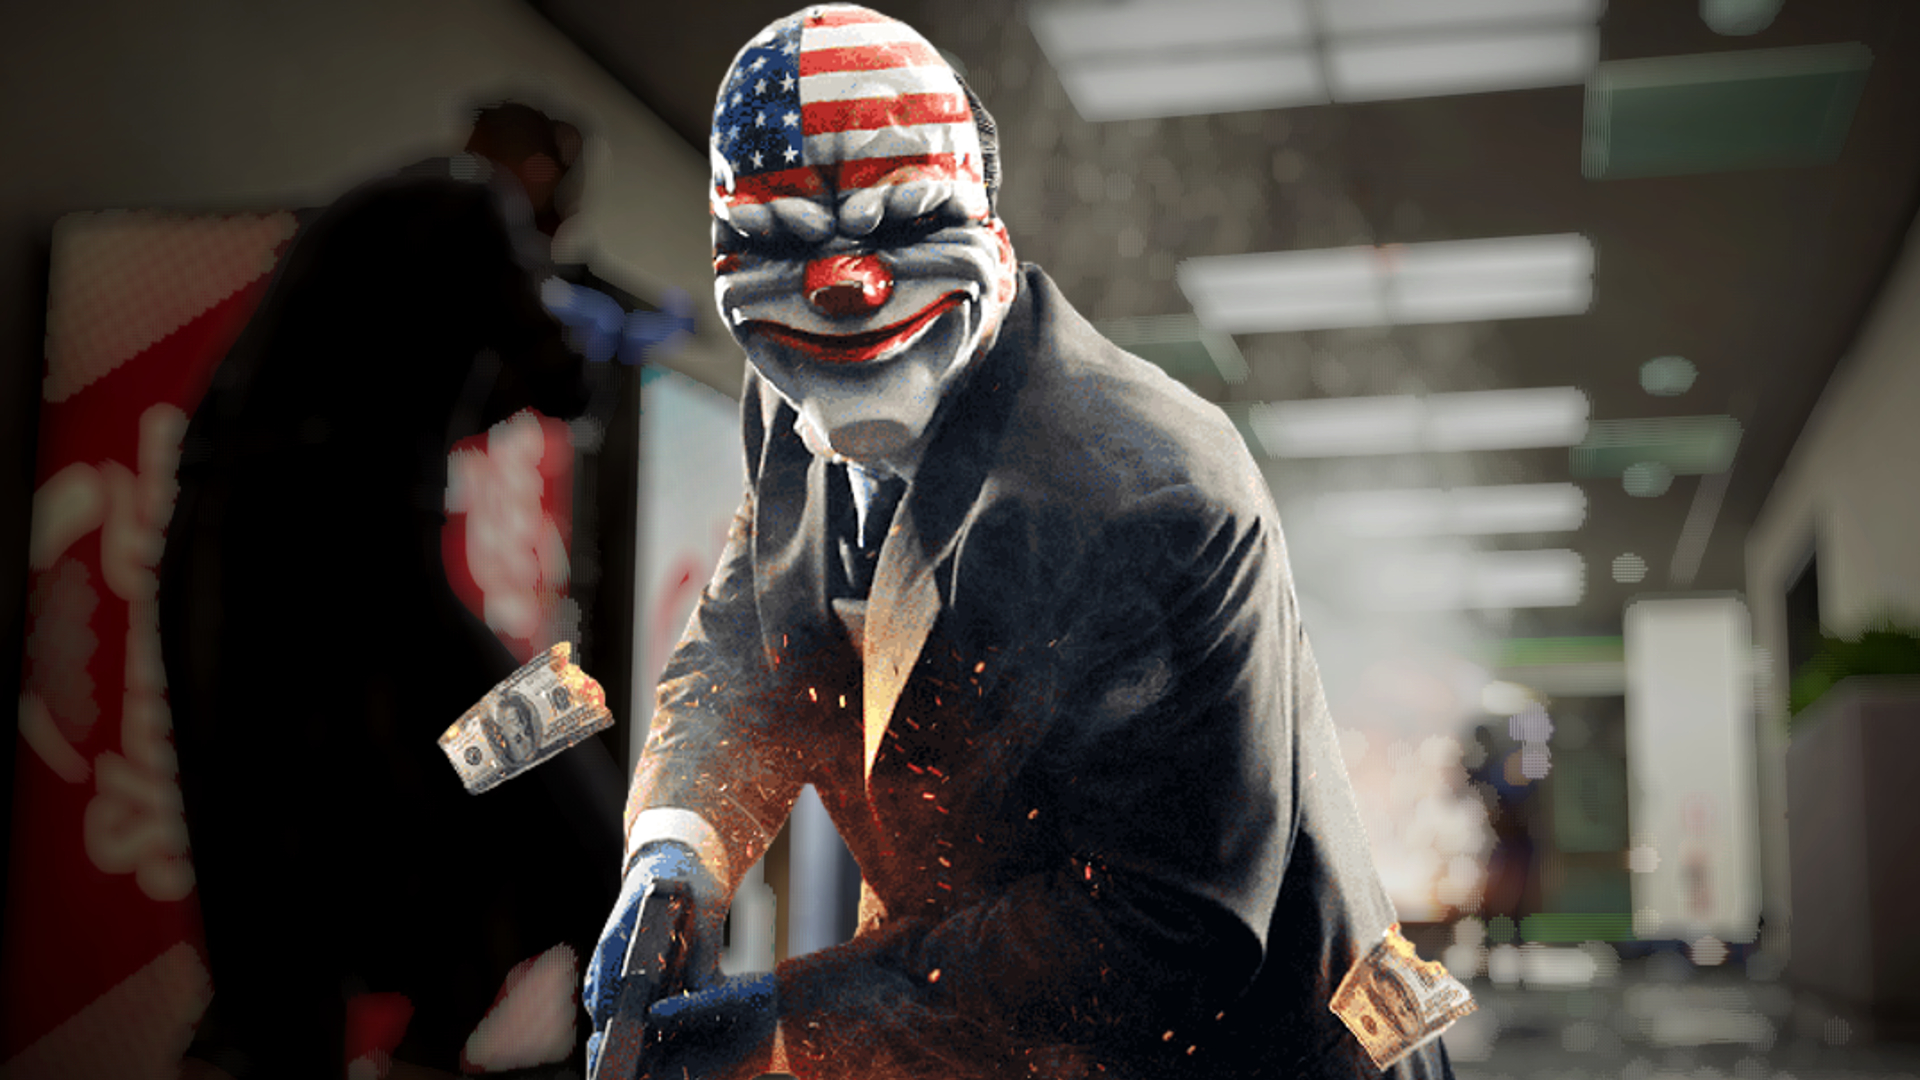 Payday 3 decides to launch without Denuvo right before release